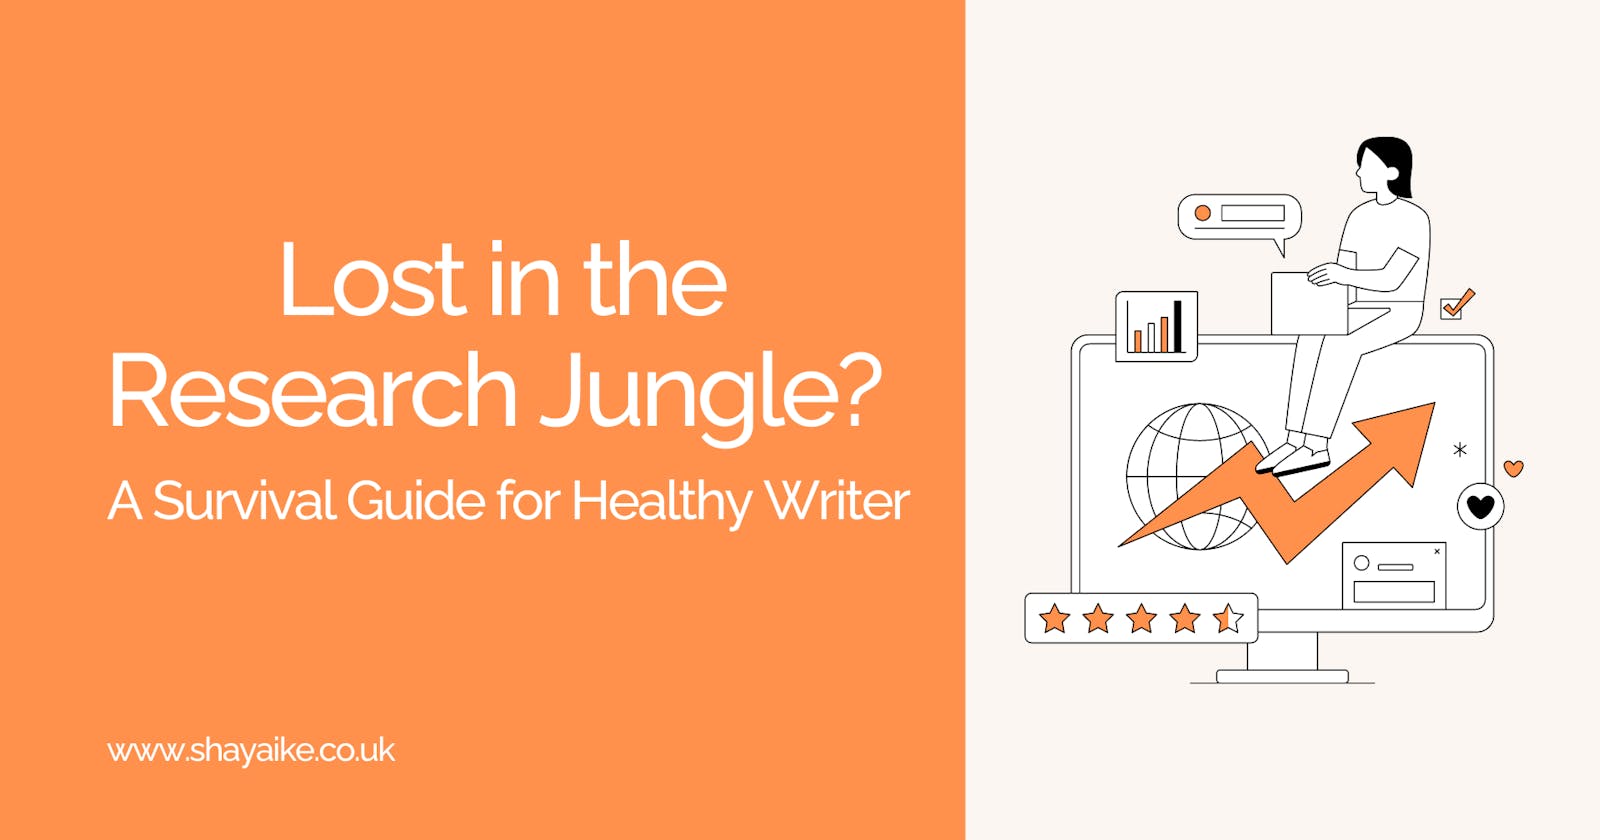 Lost in the Research Jungle? A Survival Guide for Healthy Writer